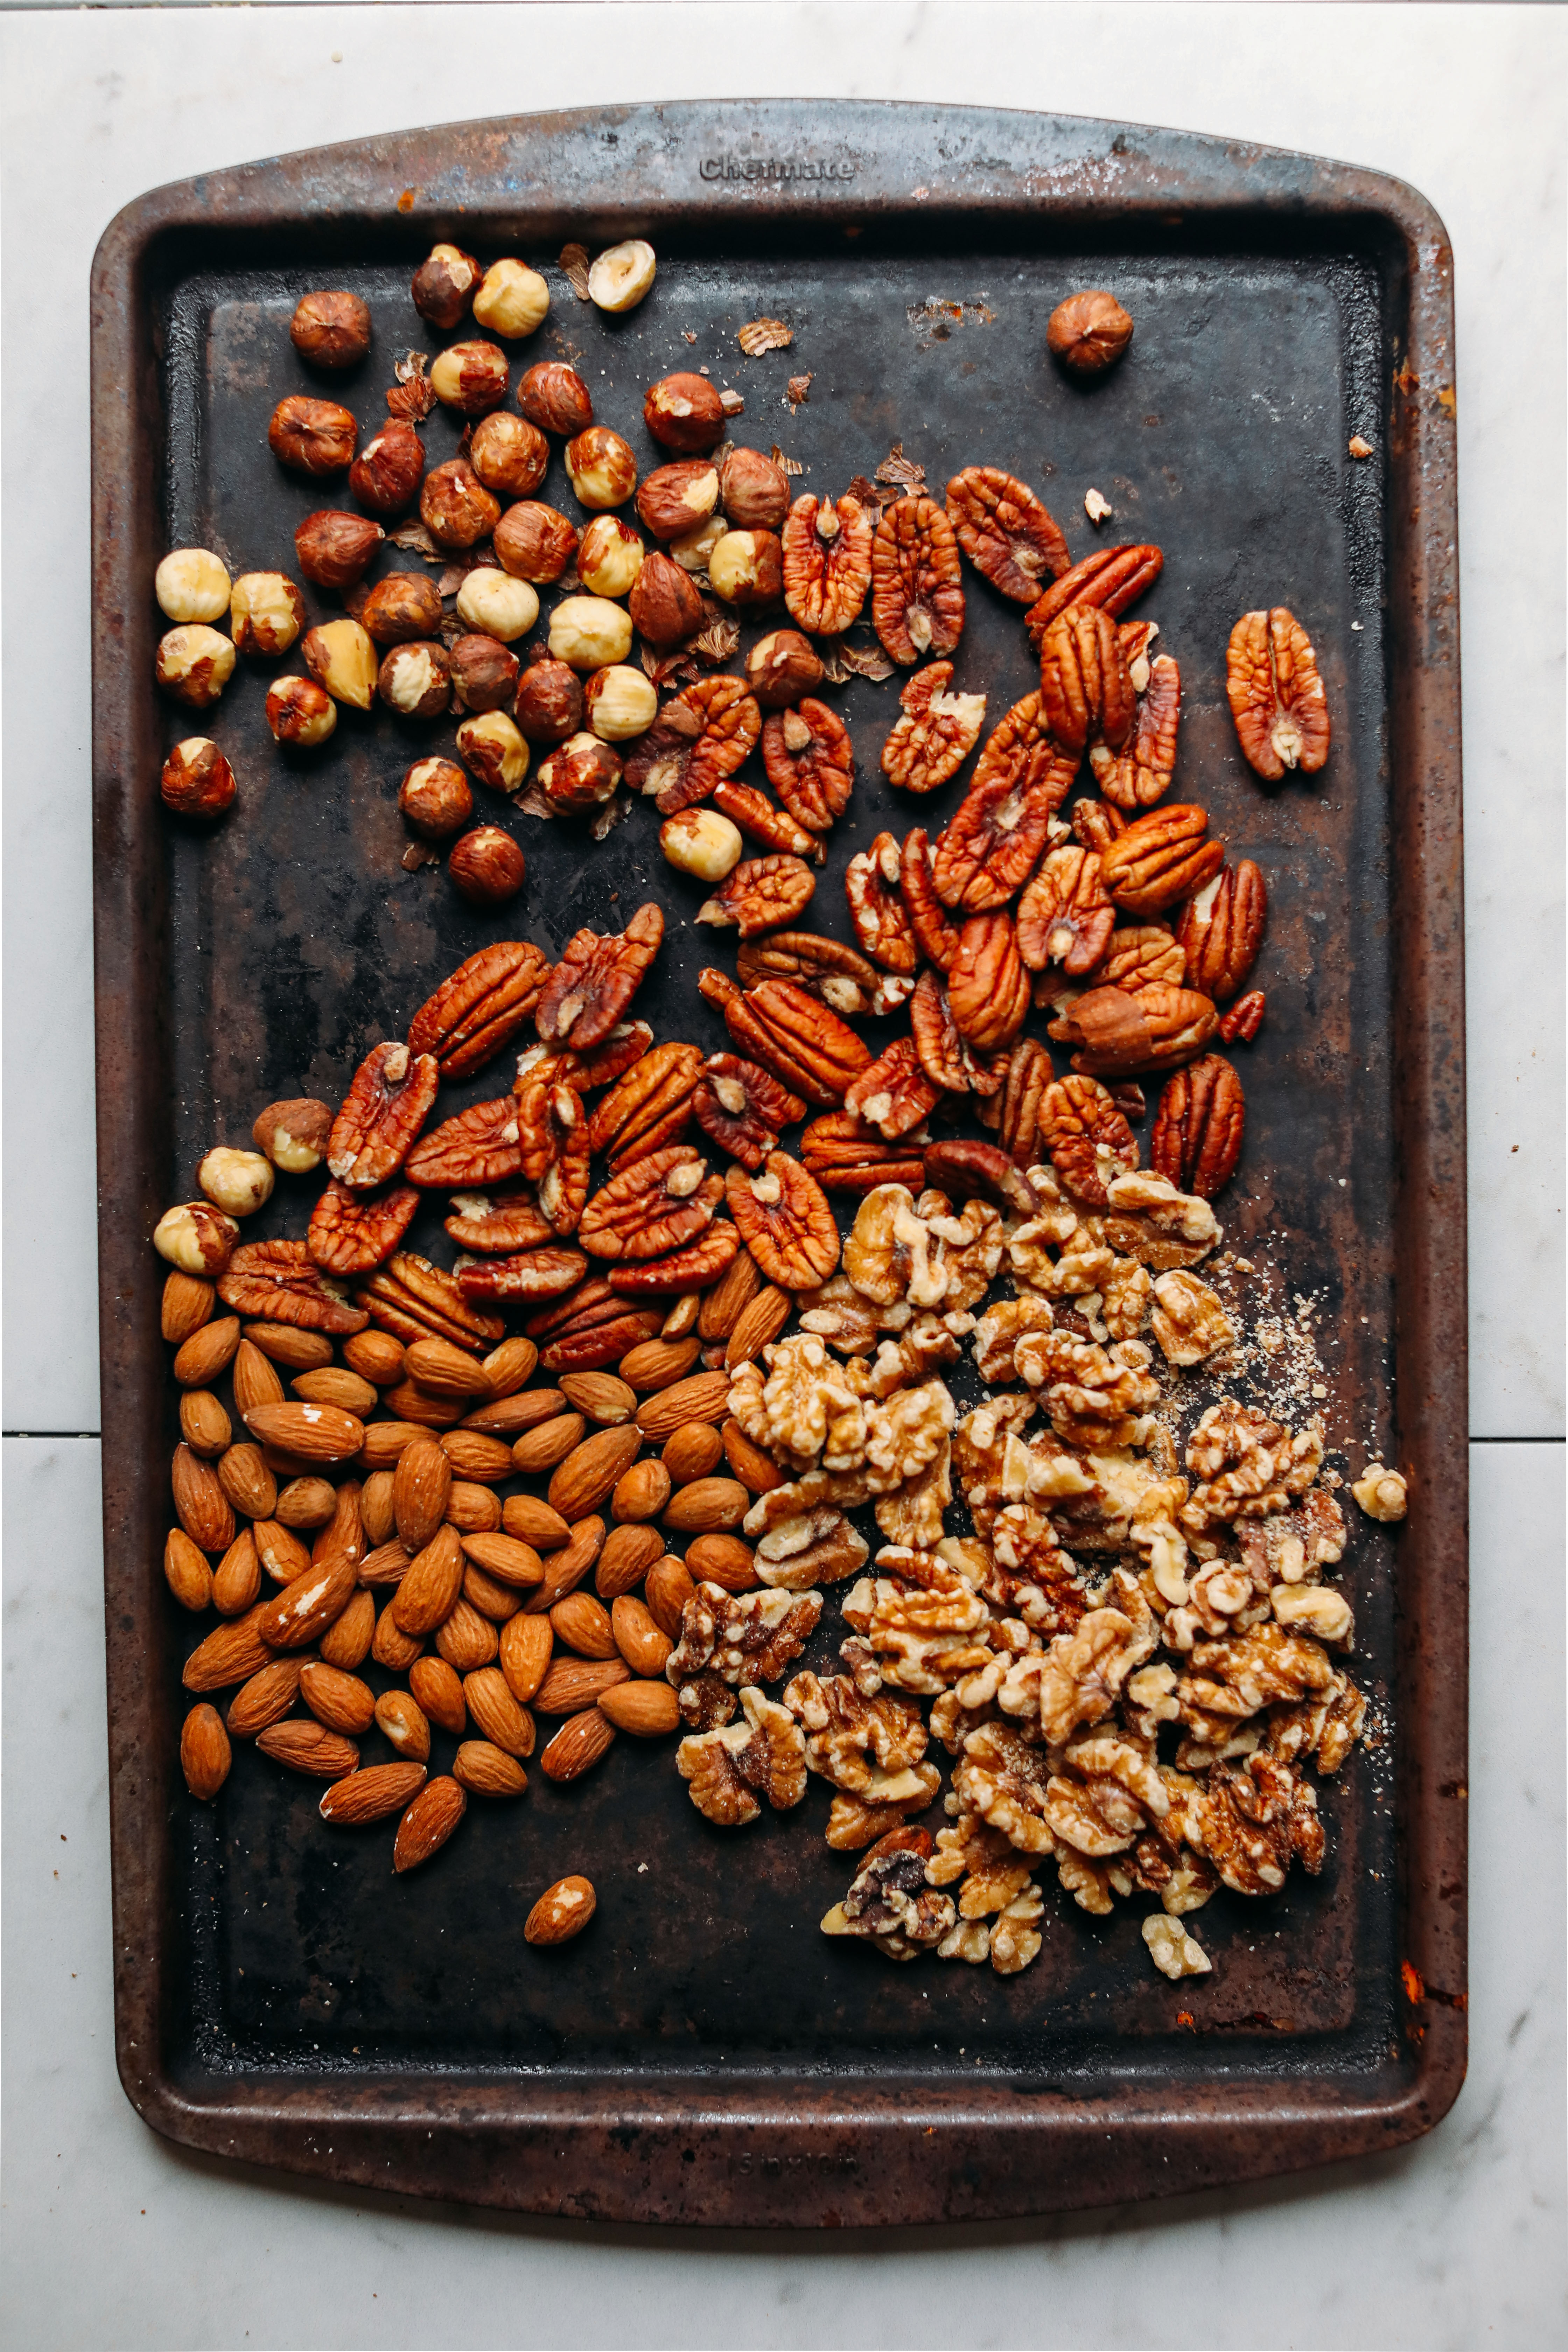 Baking sheet filled with nuts for making homemade nut butter